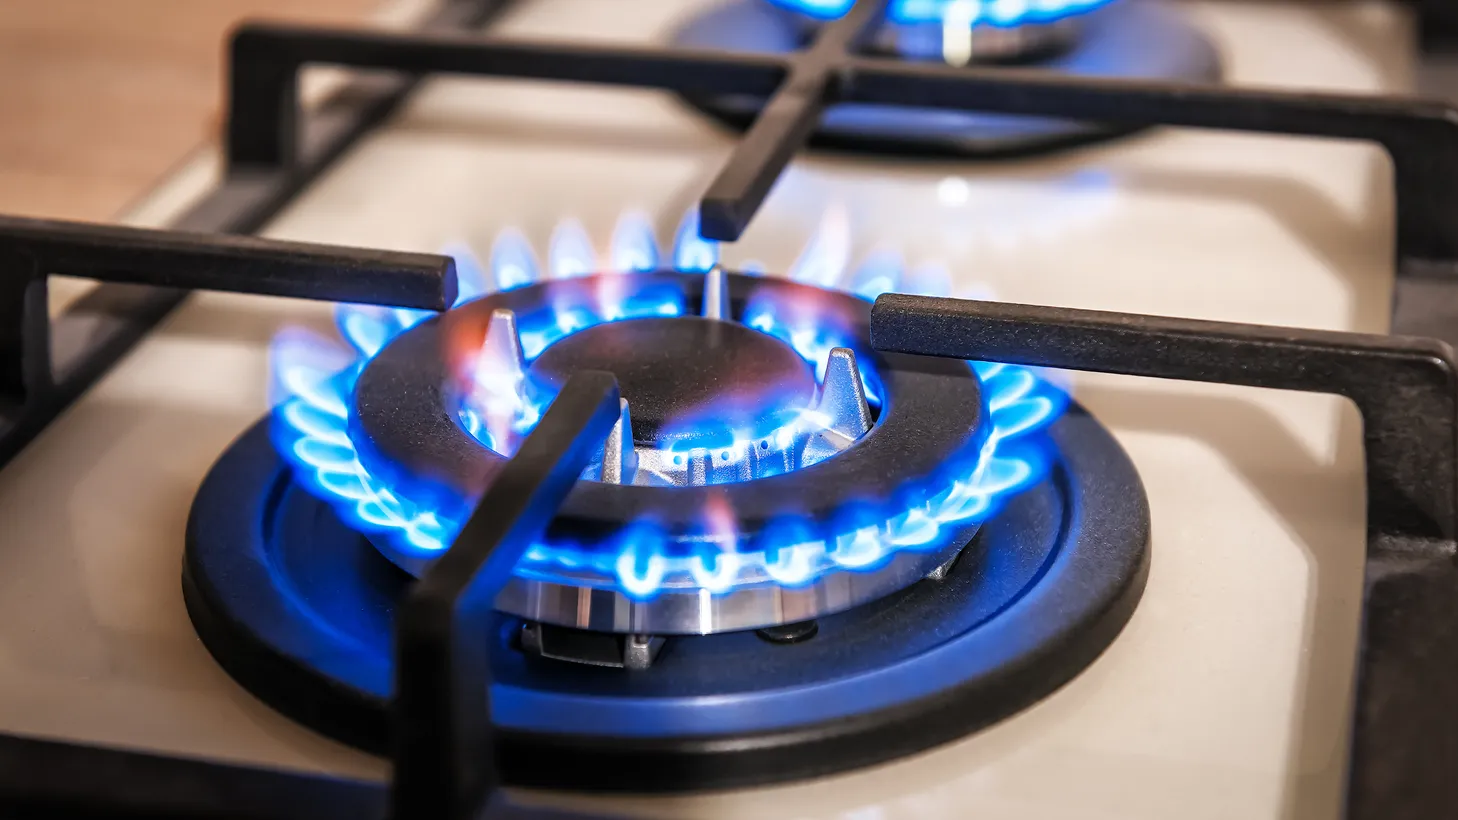 Loose connections on millions of gas stoves are emitting methane, a powerful greenhouse emission.